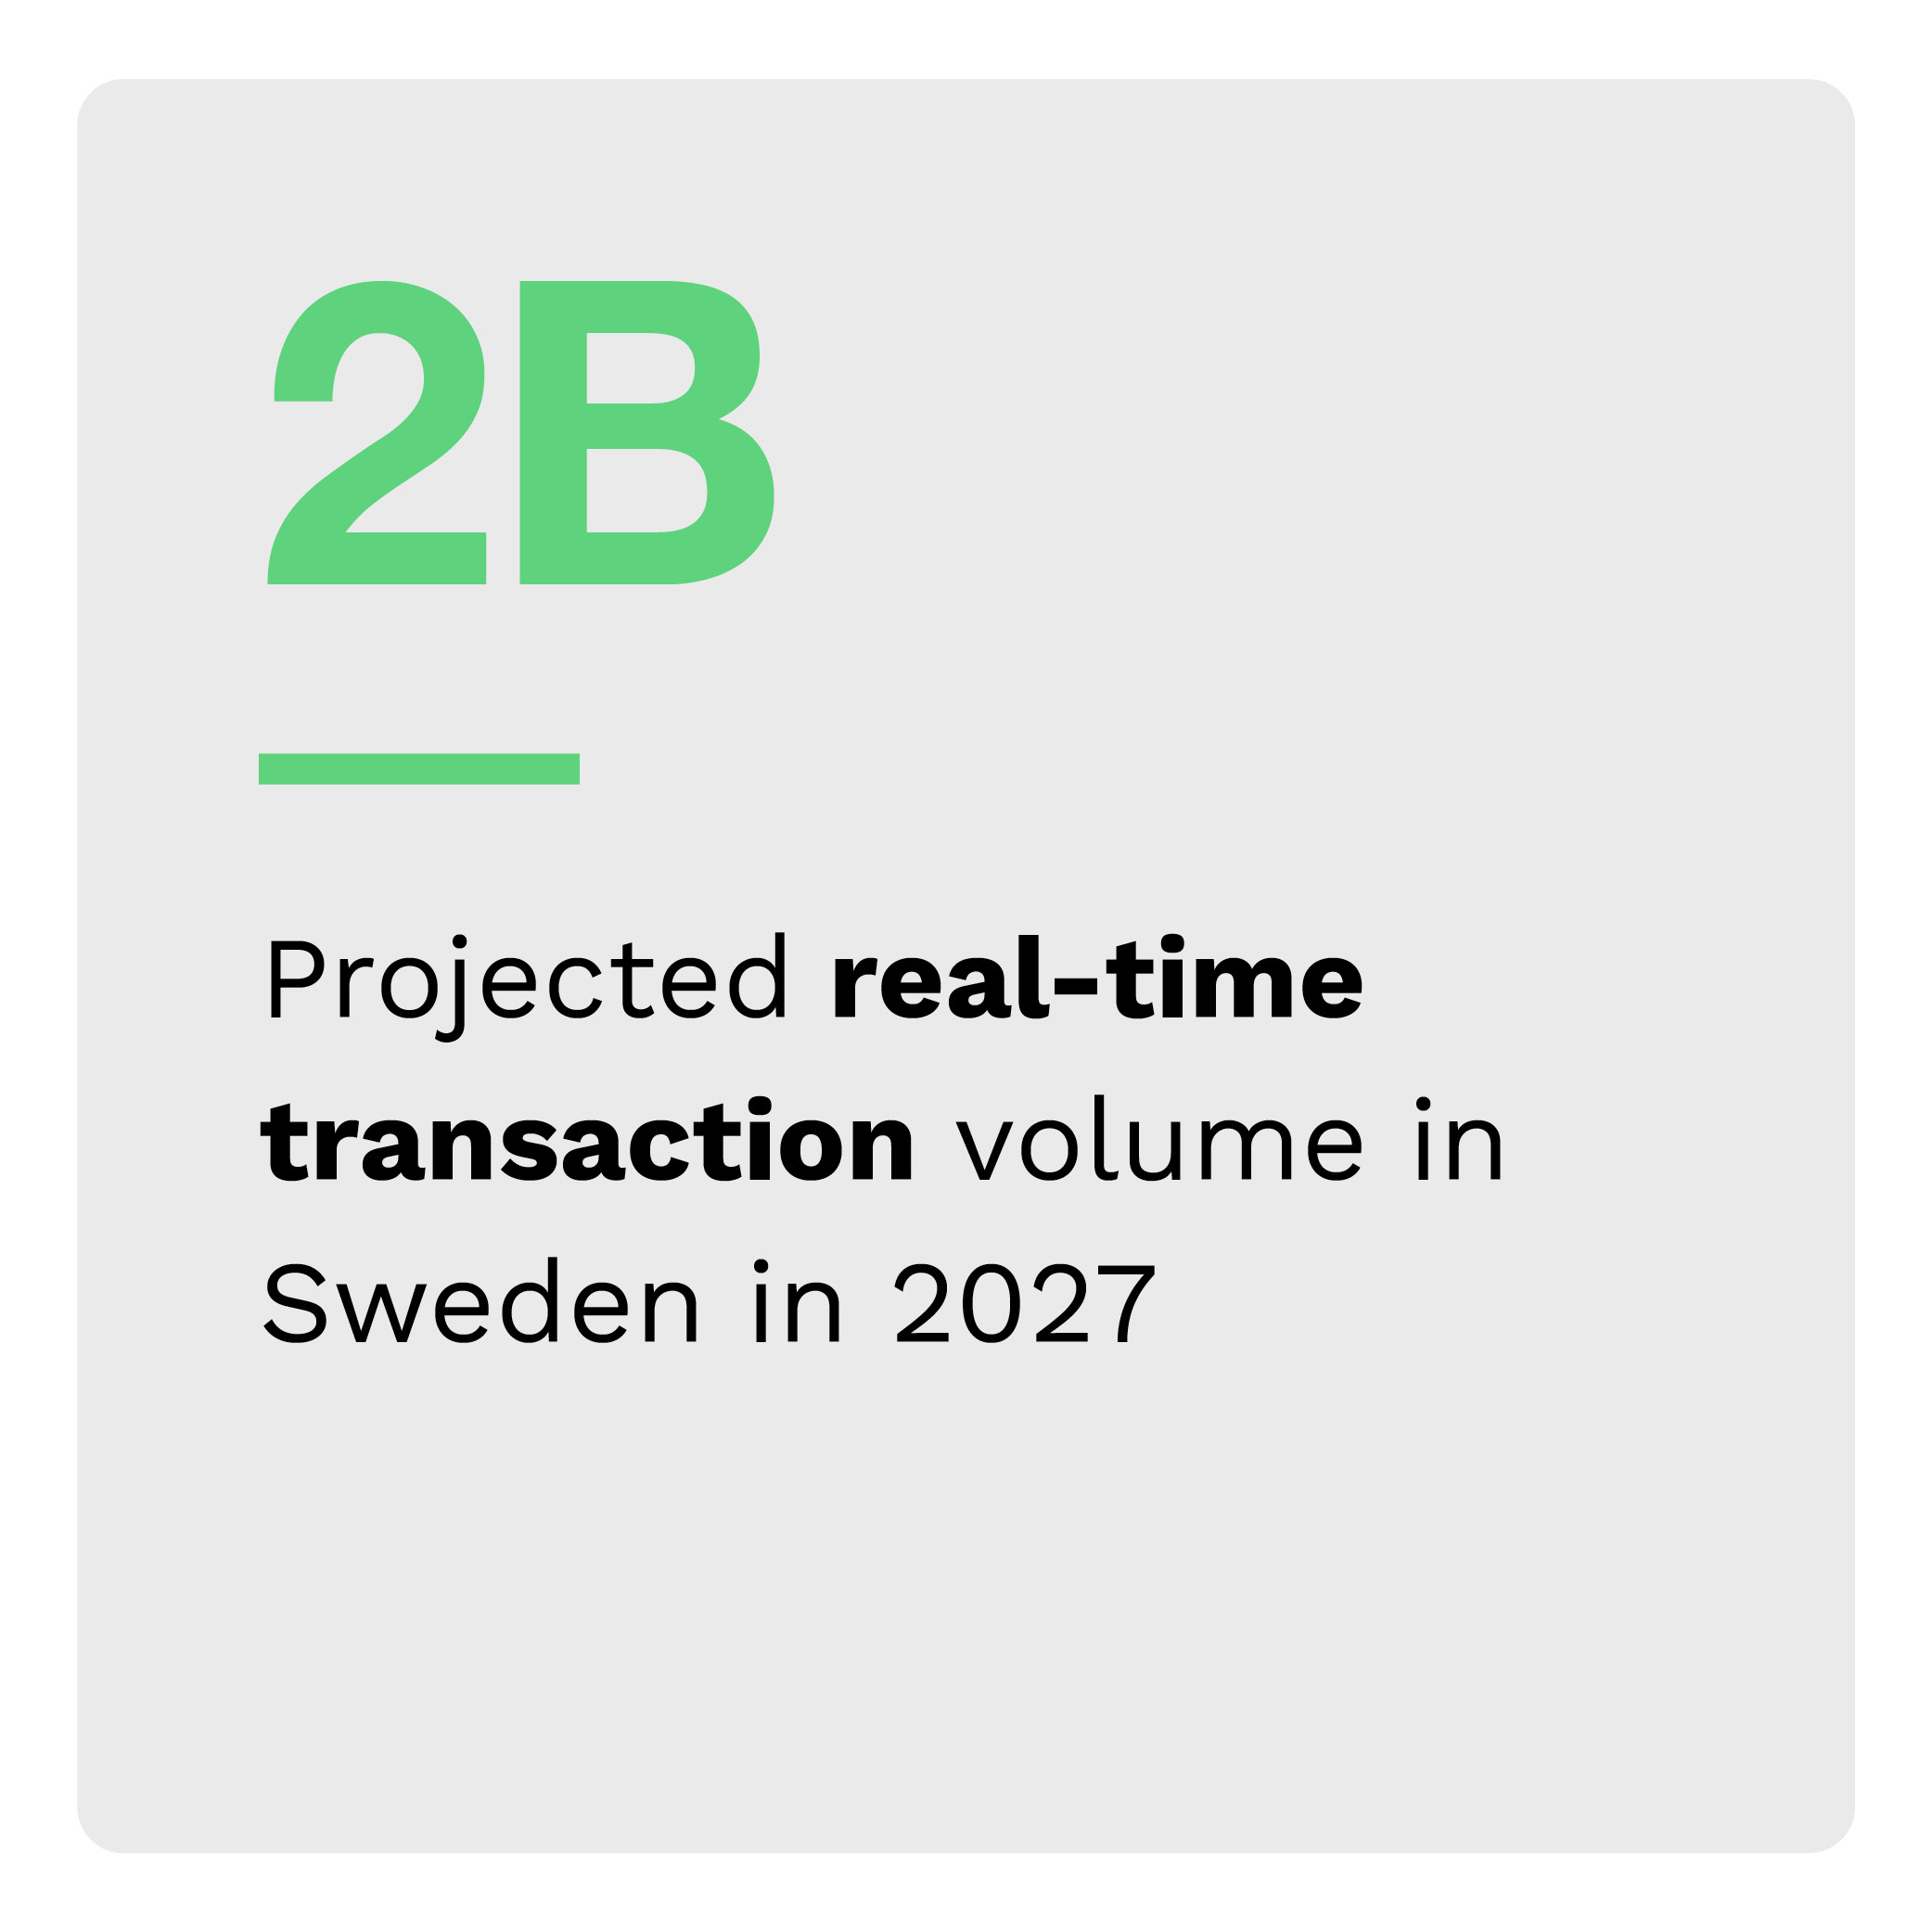 2B: Projected real-time transaction volume in Sweden in 2027